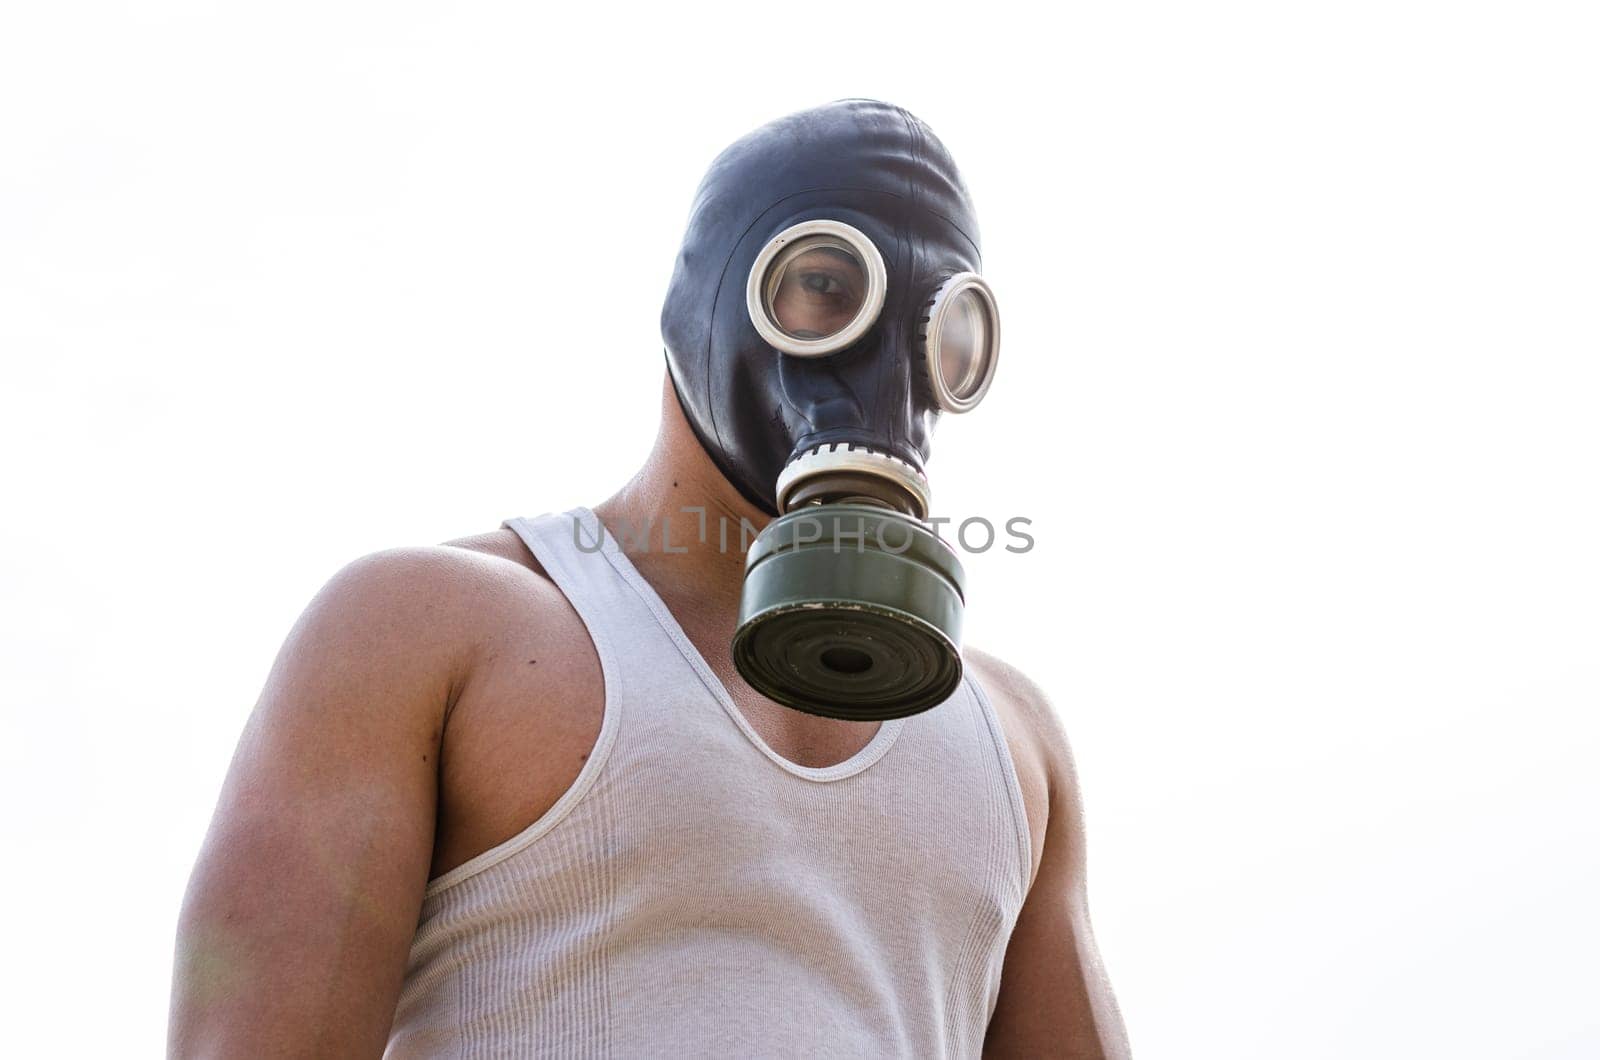 A muscular man in a gas mask. by Peruphotoart